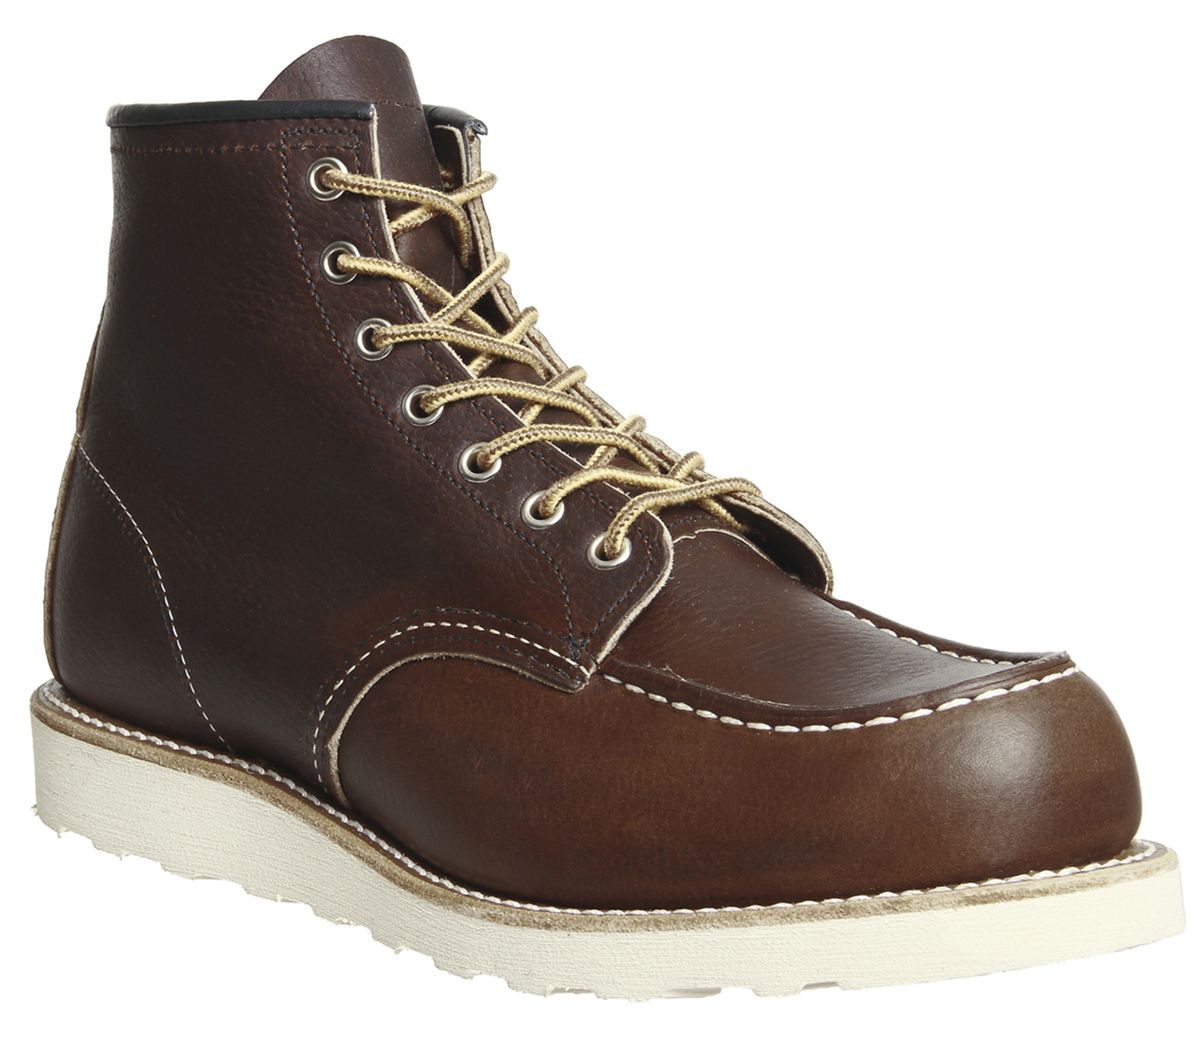 Redwing Work Wedge Boots Brown Leather - Boots